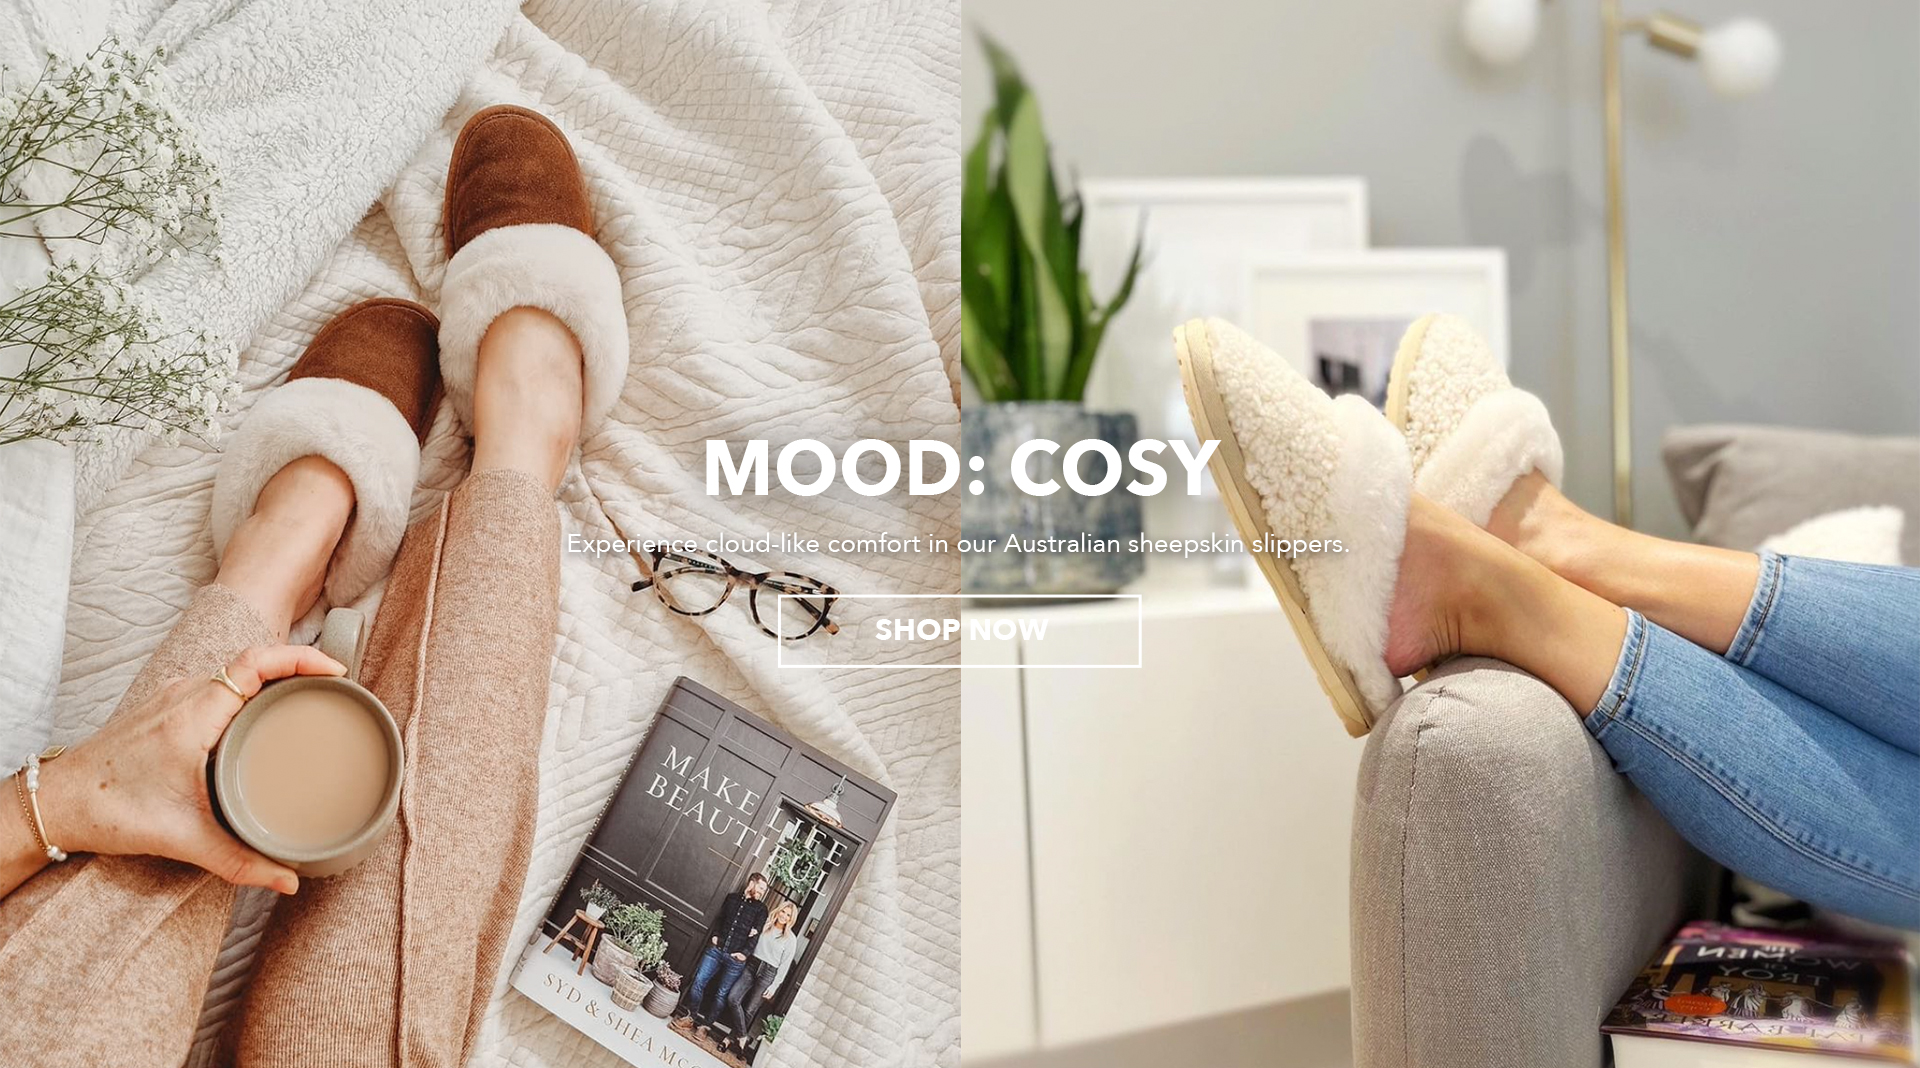 Two women wearing slippers in relaxed setting at home. MOOD: COSY, Experience cloud-like comfort in our Australian sheepskin slippers. Shop Now.